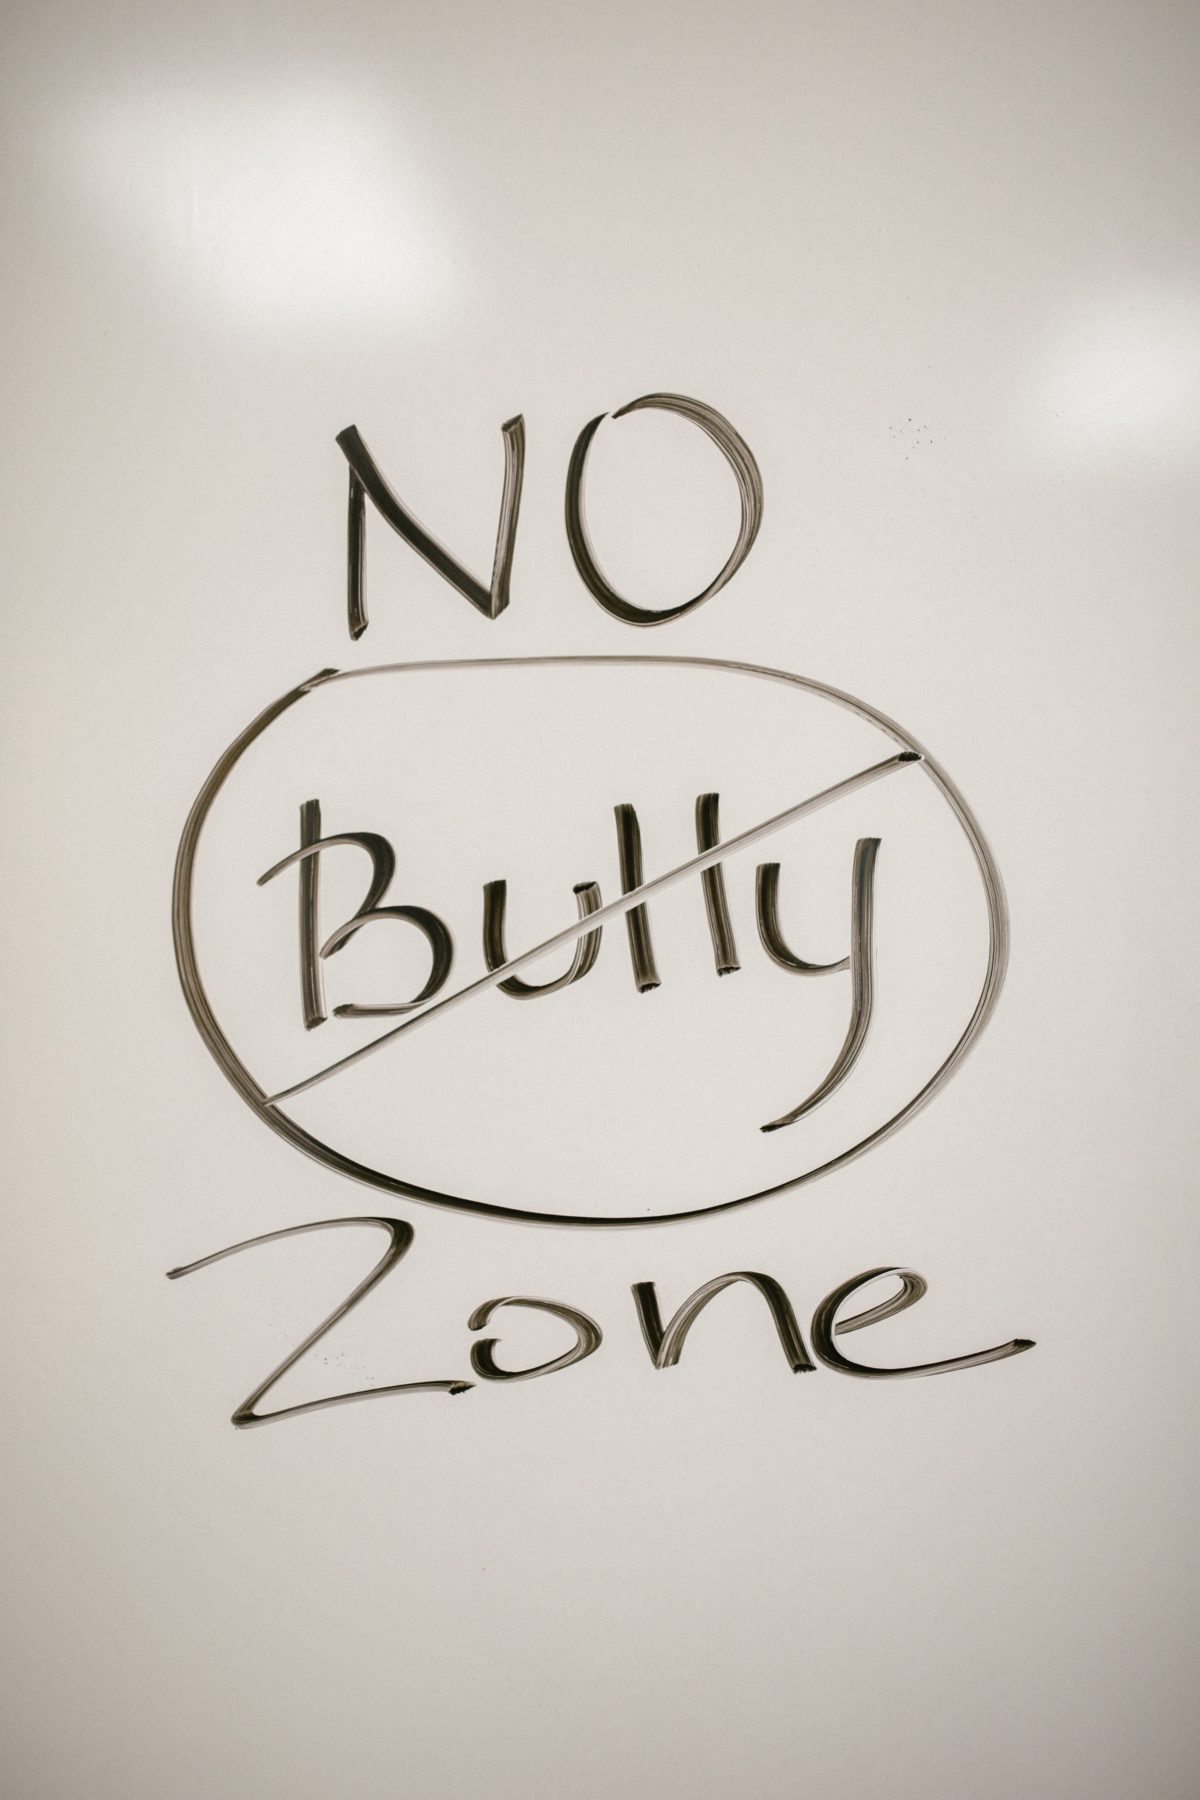 Sign that says "No Bully Zone"